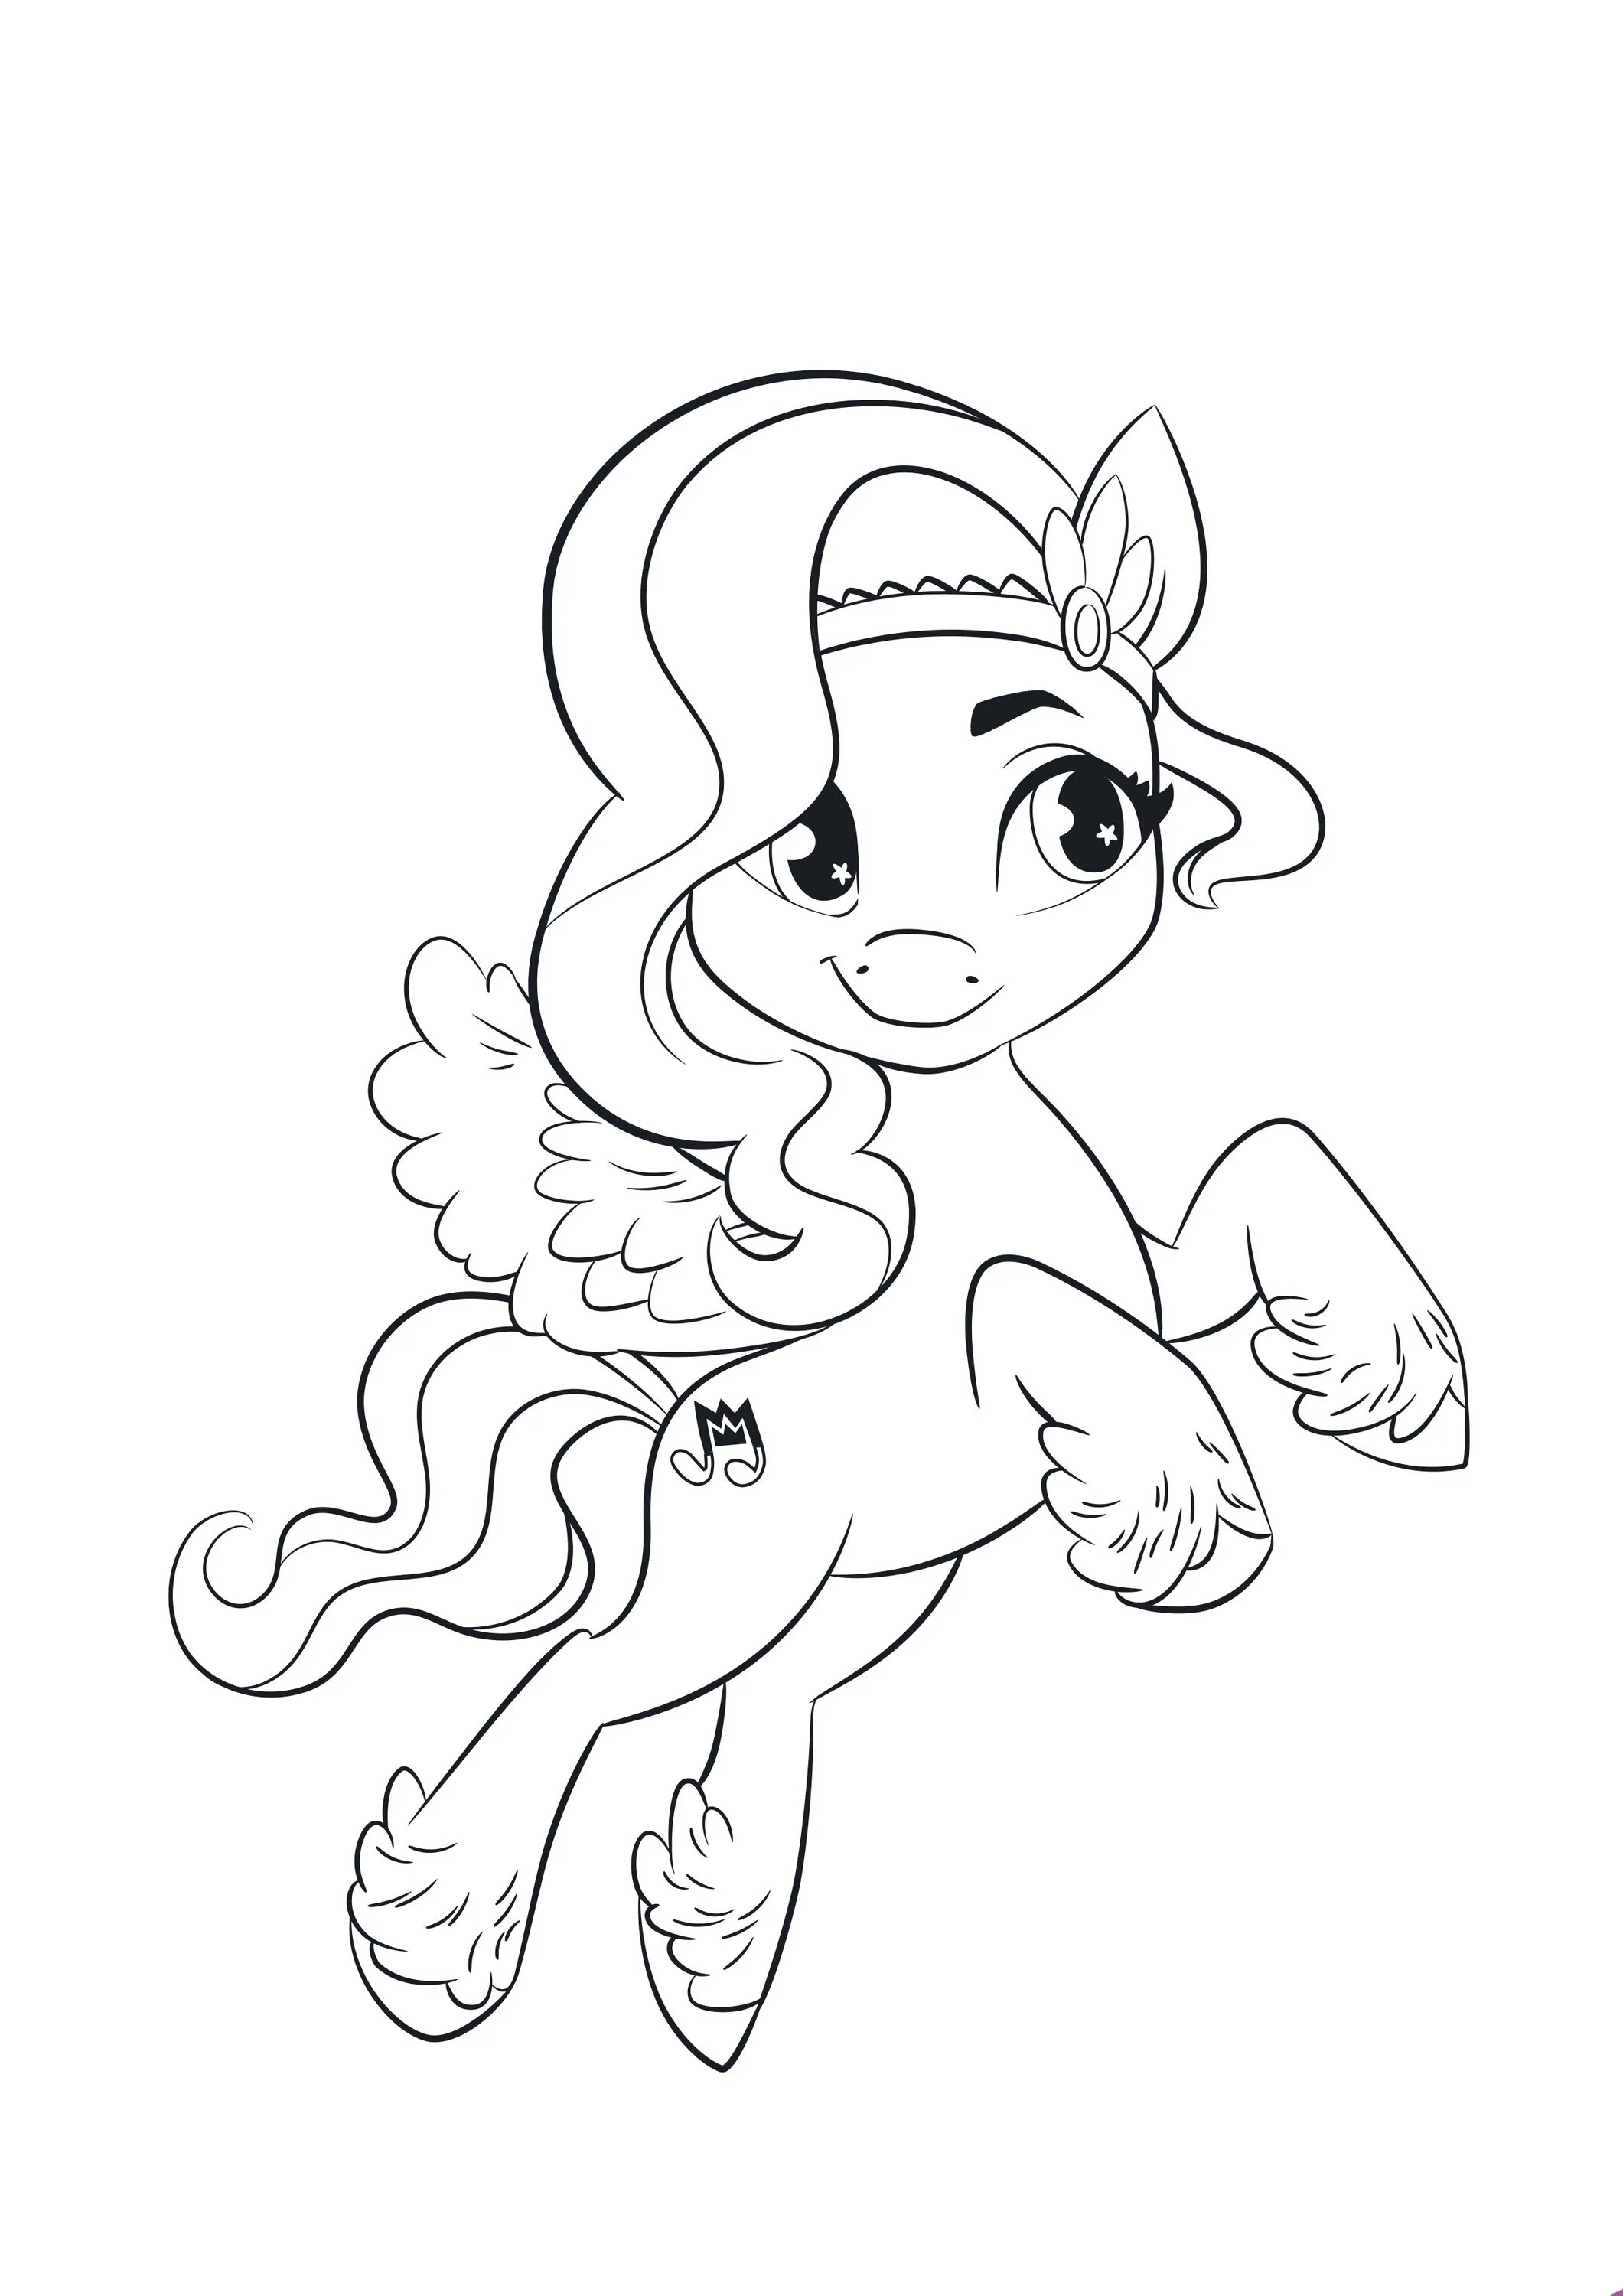 Easy pony coloring pages